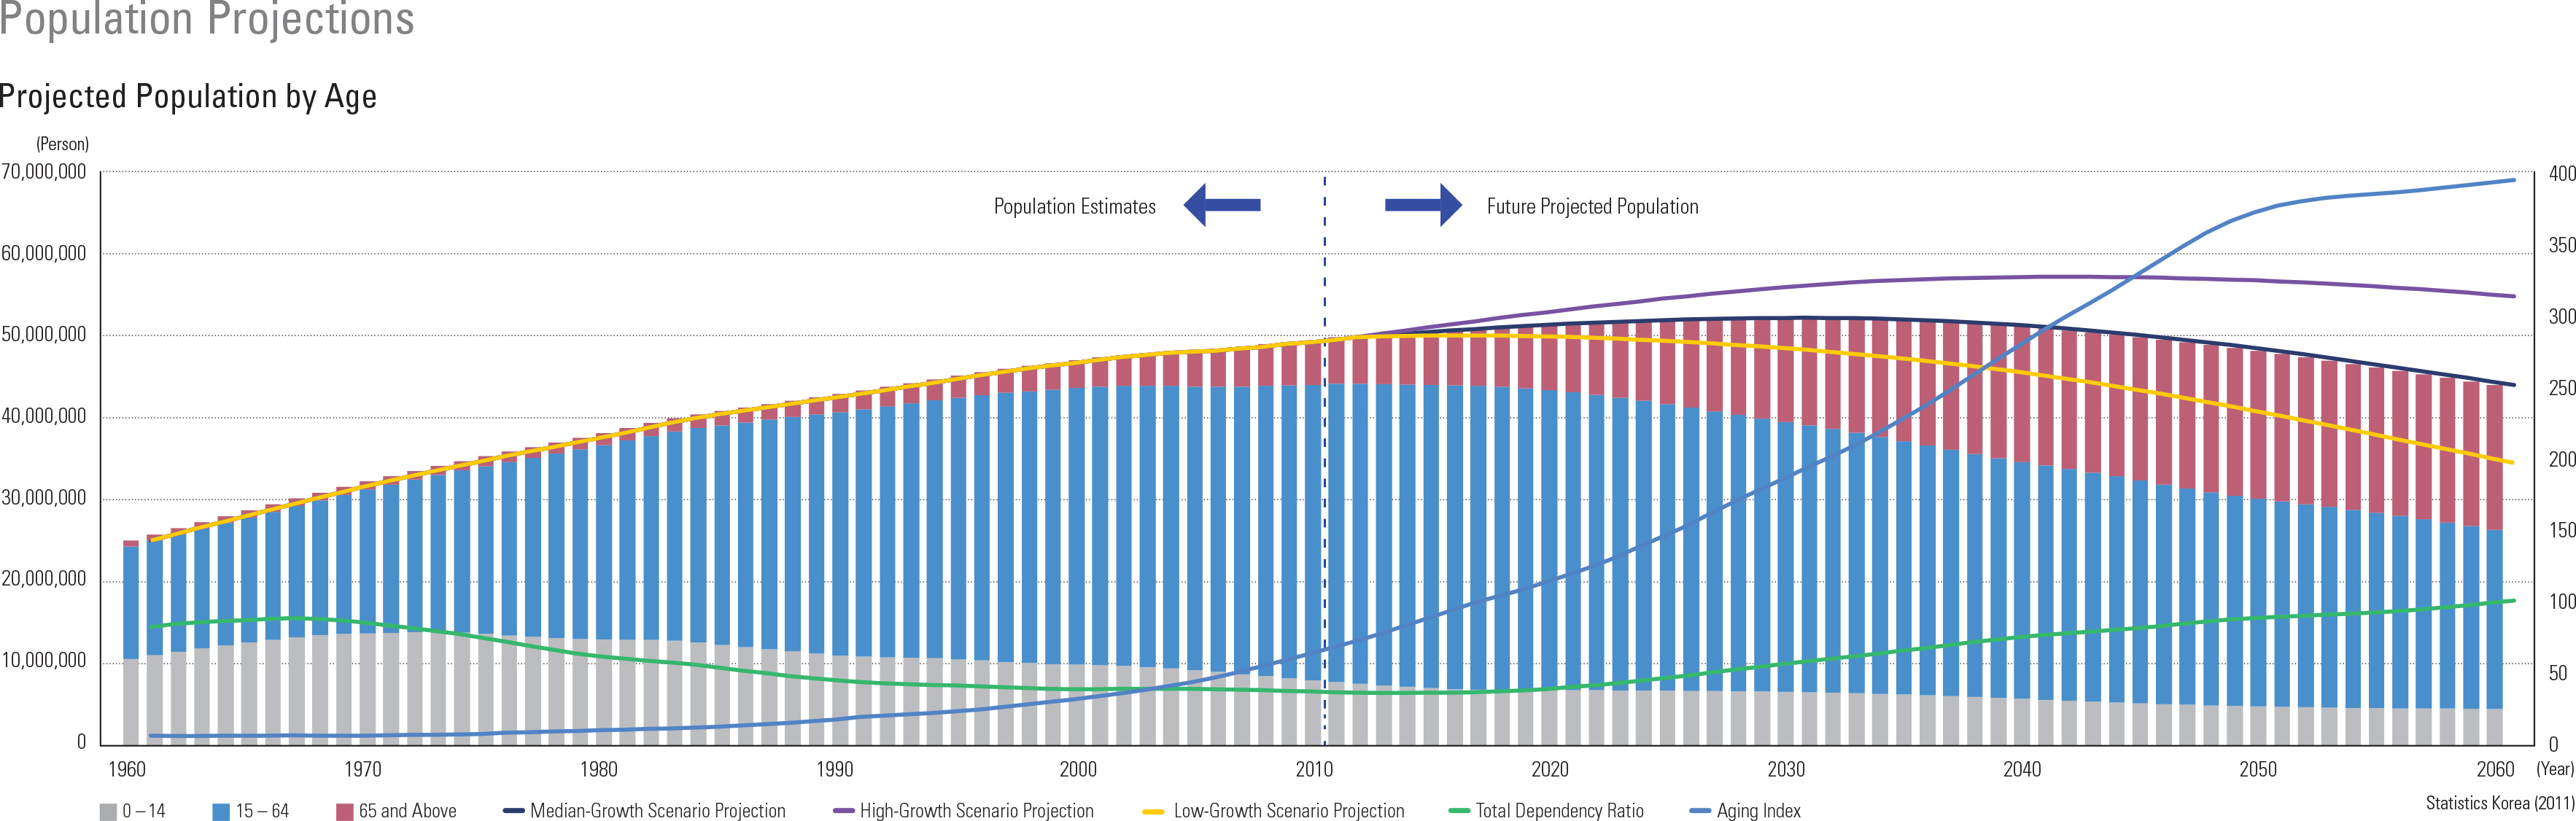 Projected Population by Age